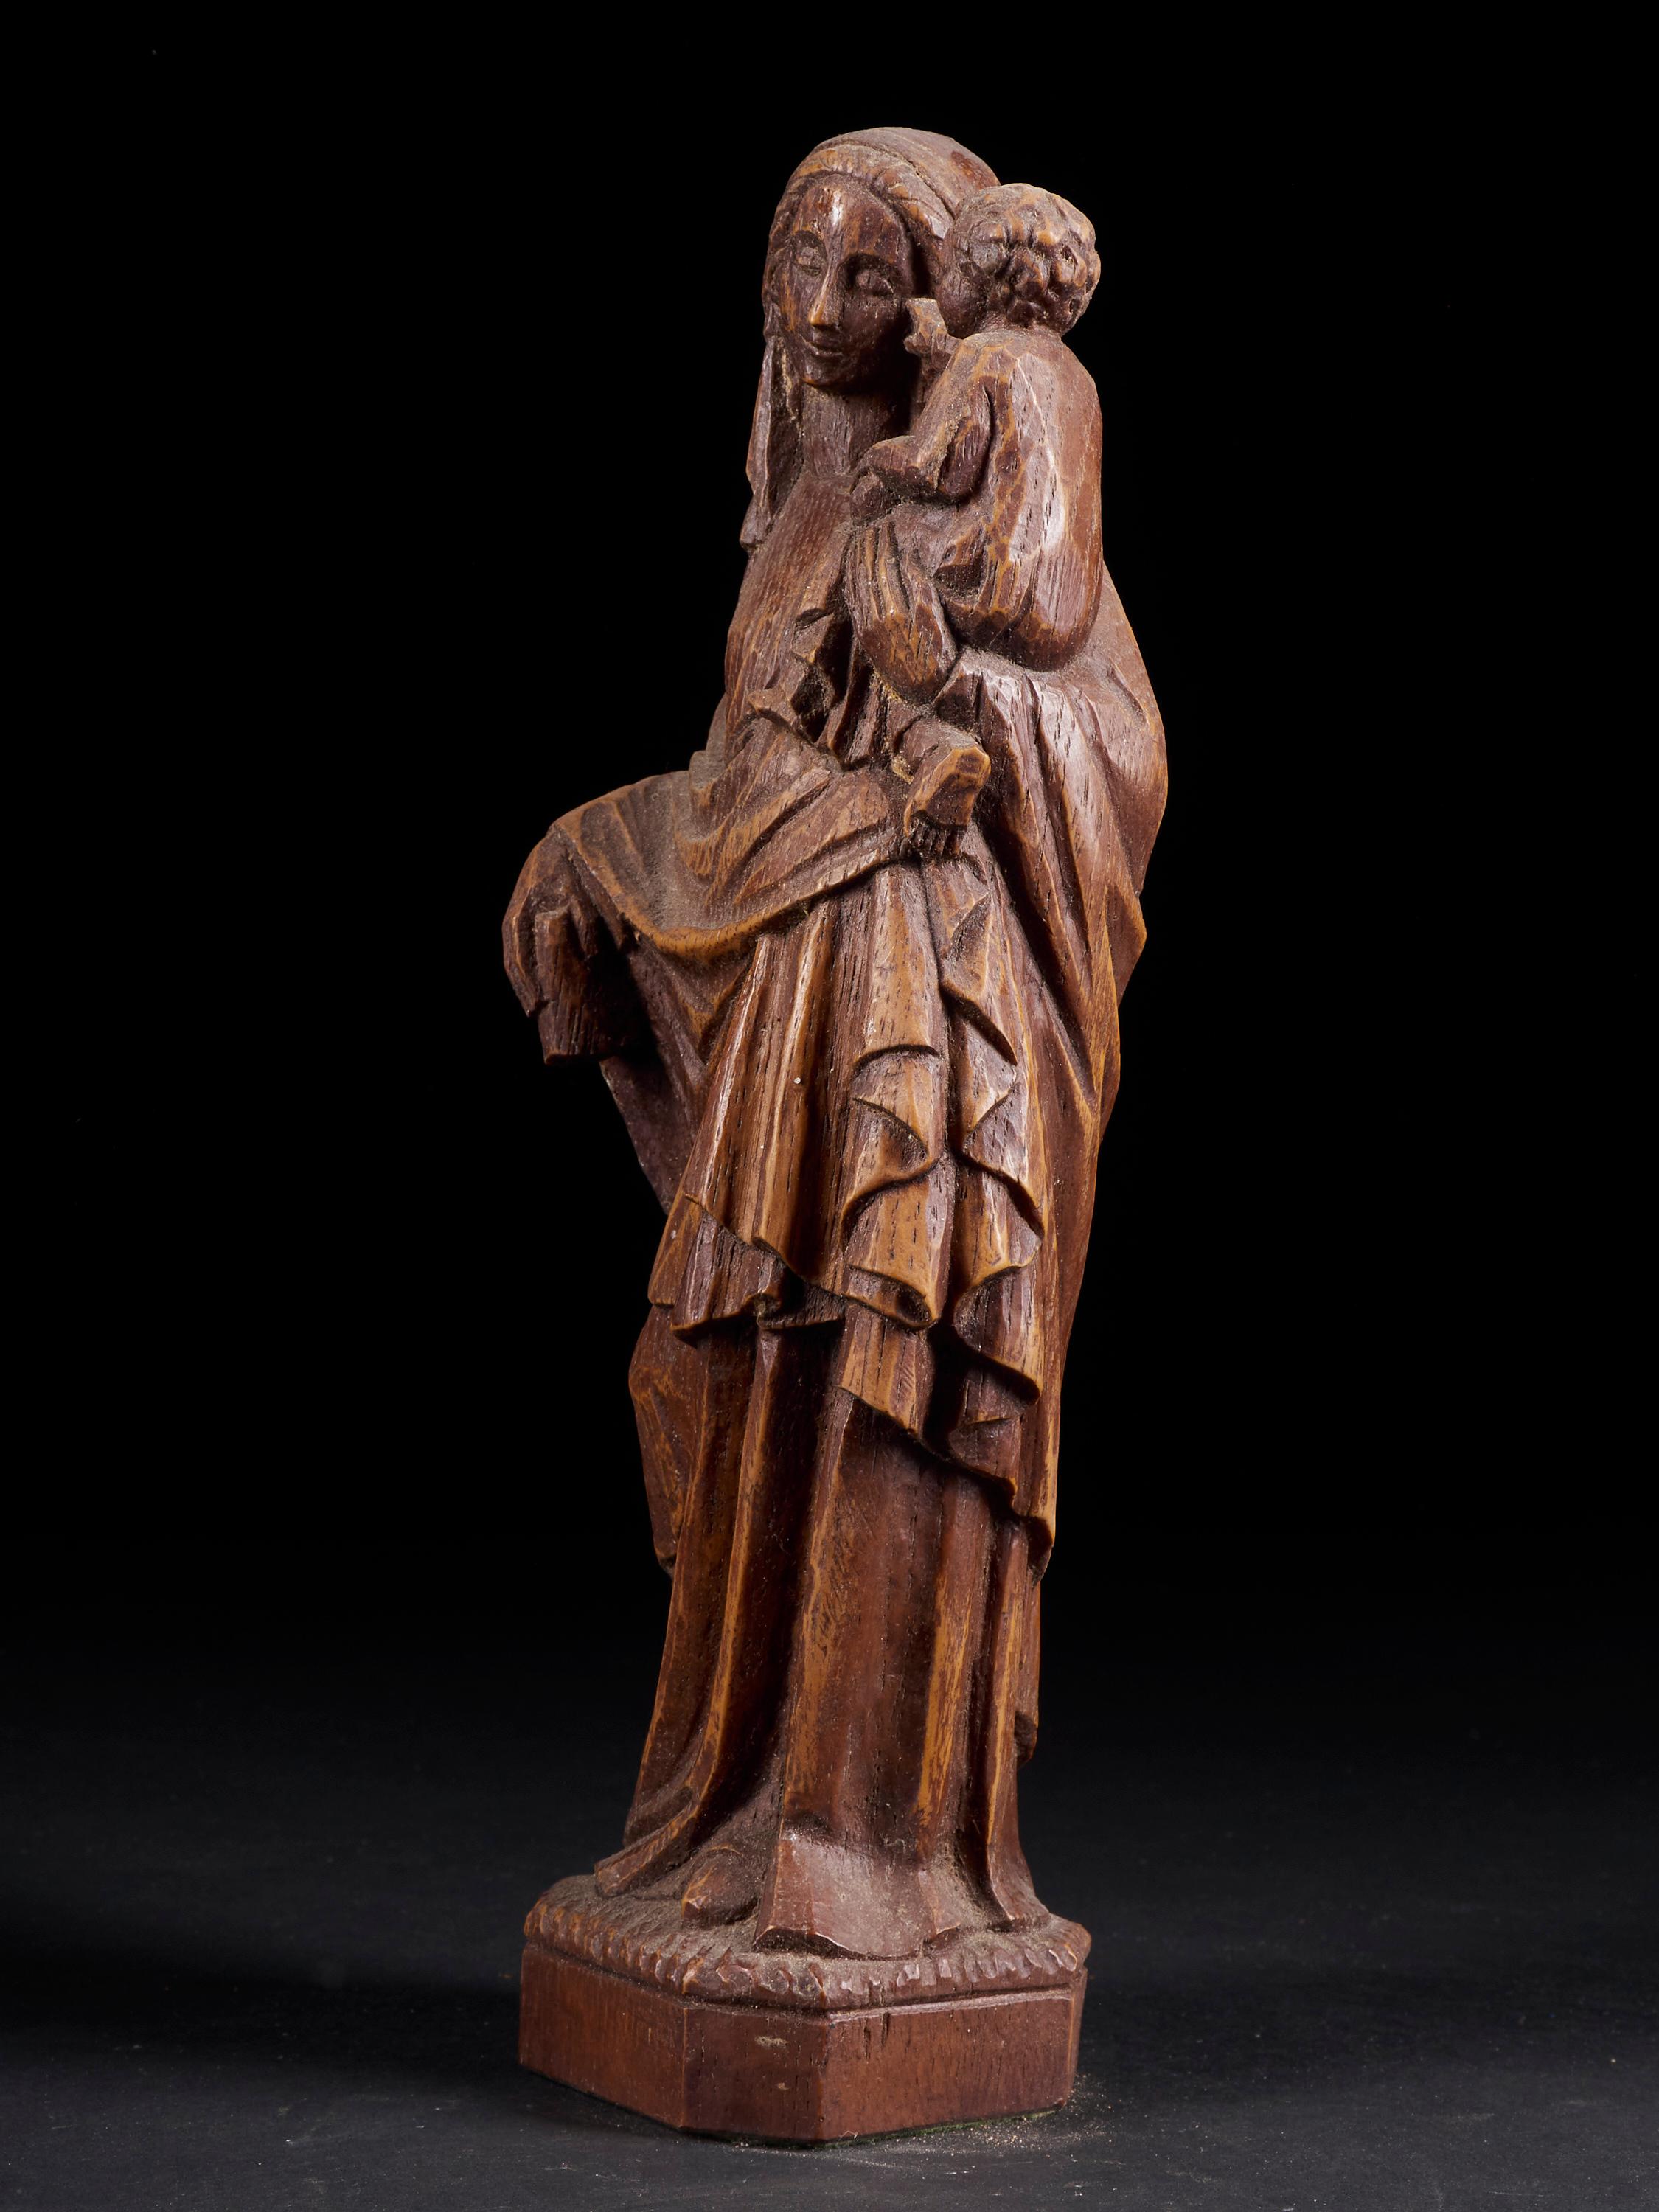 Beautiful contrapposto Virgin Mary carrying her child on her left arm. This wooden sculpture shows nice movement of the two figures with full and nervous drapes.